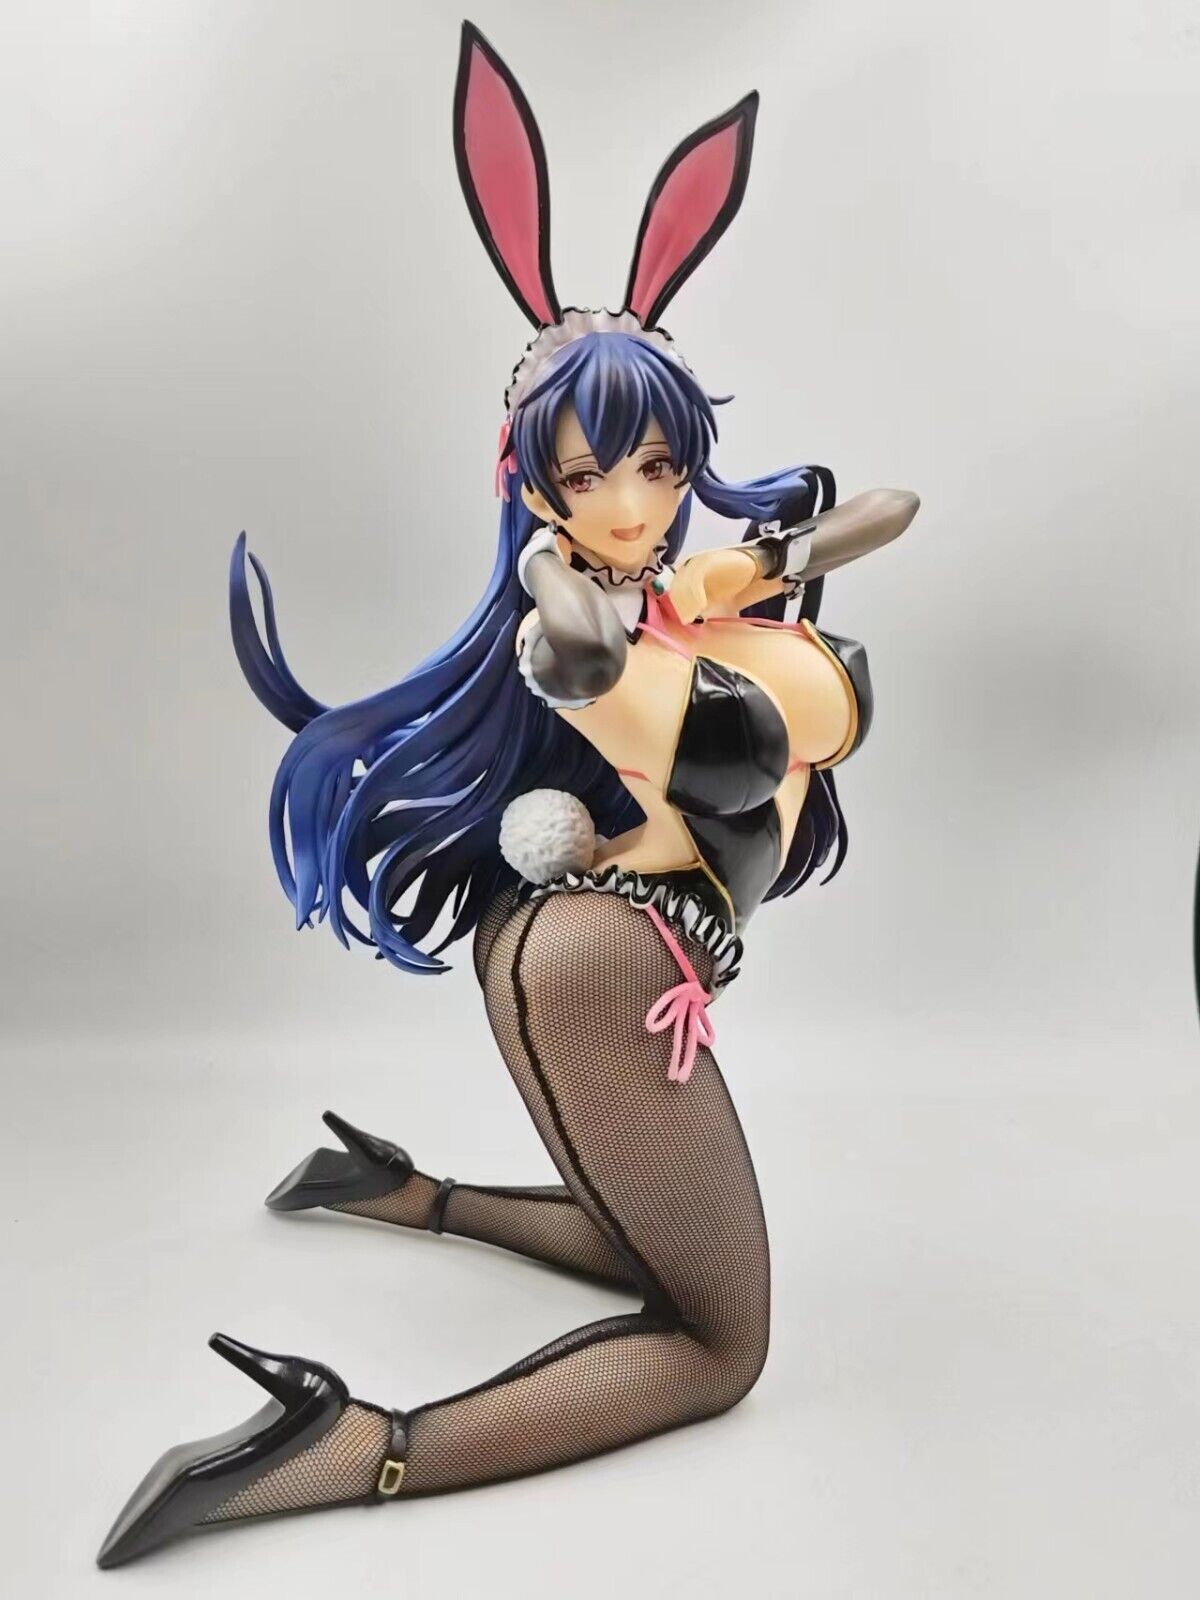 1/4 38CM Bunny Anime Girl Figures PVC toy Gift Plastic statue No box Can take